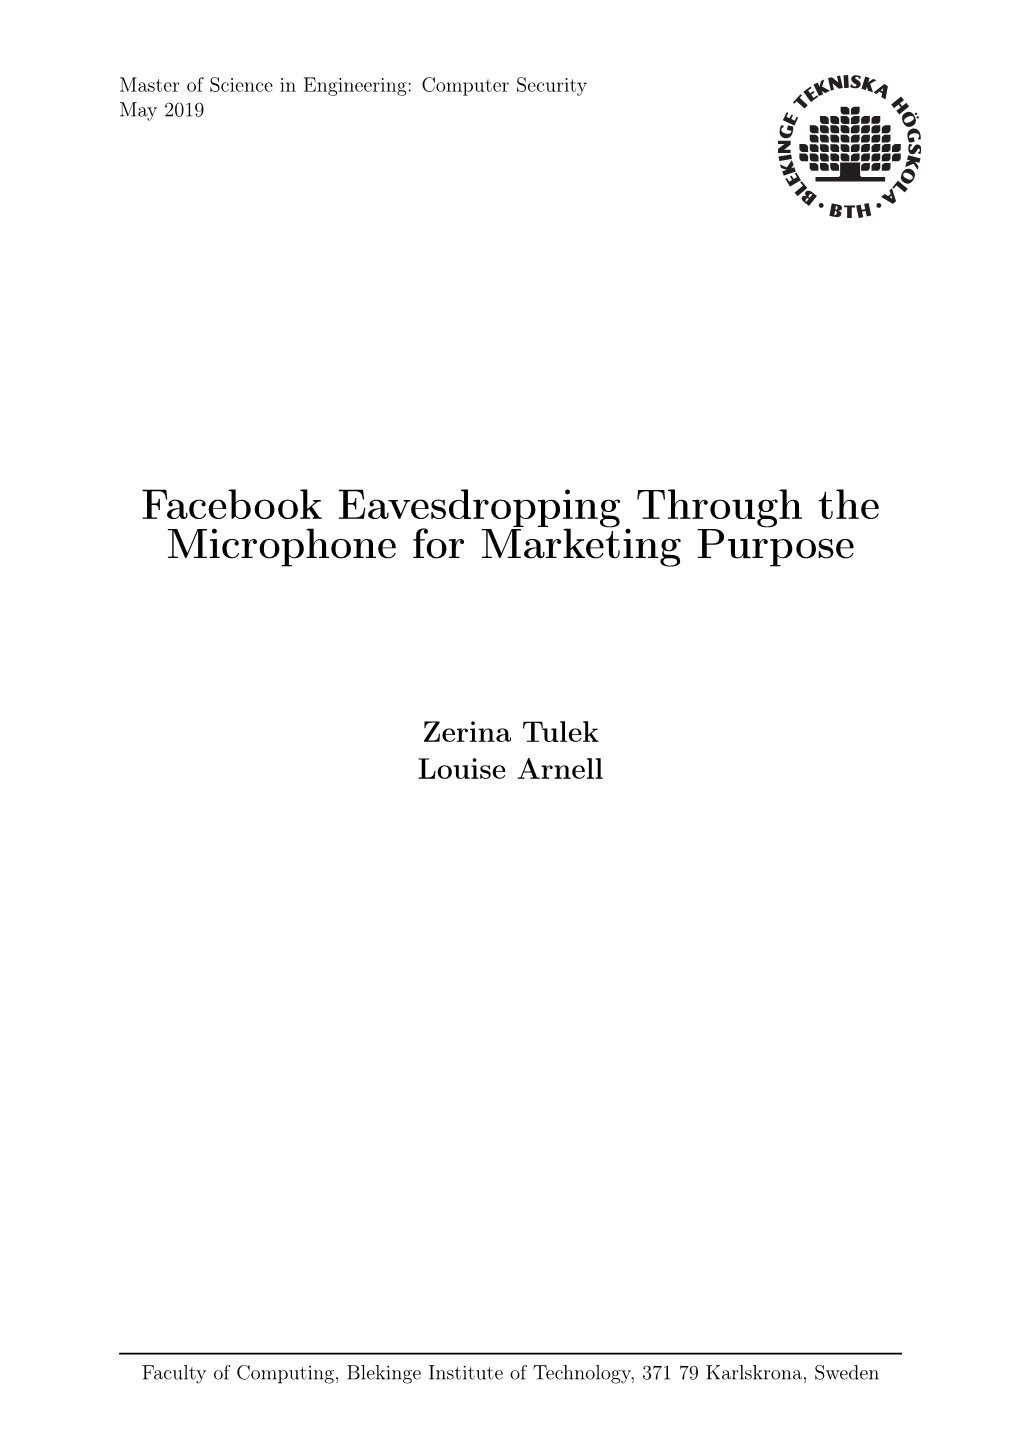 Facebook Eavesdropping Through the Microphone for Marketing Purpose